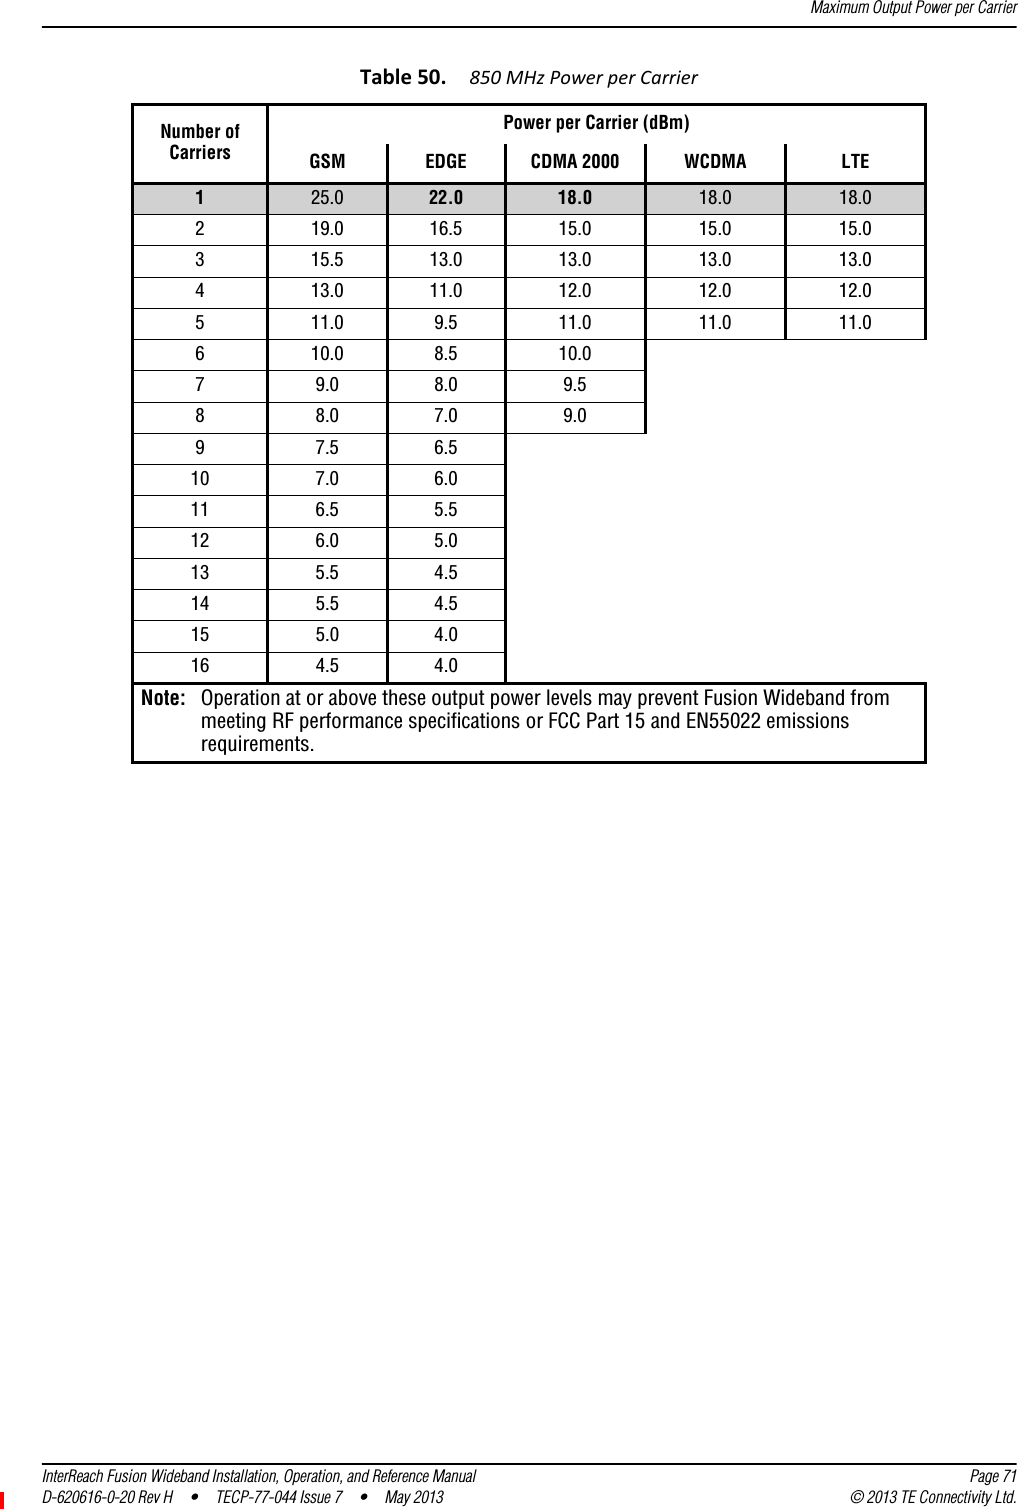 Maximum Output Power per CarrierInterReach Fusion Wideband Installation, Operation, and Reference Manual Page 71D-620616-0-20 Rev H • TECP-77-044 Issue 7  •  May 2013 © 2013 TE Connectivity Ltd.Table50.850MHzPowerperCarrierNumber ofCarriersPower per Carrier (dBm)GSM EDGE CDMA 2000 WCDMA LTE125.0 22.0 18.0 18.0 18.0219.0 16.5 15.0 15.0 15.0315.5 13.0 13.0 13.0 13.0413.0 11.0 12.0 12.0 12.0511.0 9.5 11.0 11.0 11.0610.0 8.5 10.079.0 8.0 9.588.0 7.0 9.097.5 6.510 7.0 6.011 6.5 5.512 6.0 5.013 5.5 4.514 5.5 4.515 5.0 4.016 4.5 4.0Note: Operation at or above these output power levels may prevent Fusion Wideband from meeting RF performance specifications or FCC Part 15 and EN55022 emissions requirements. 